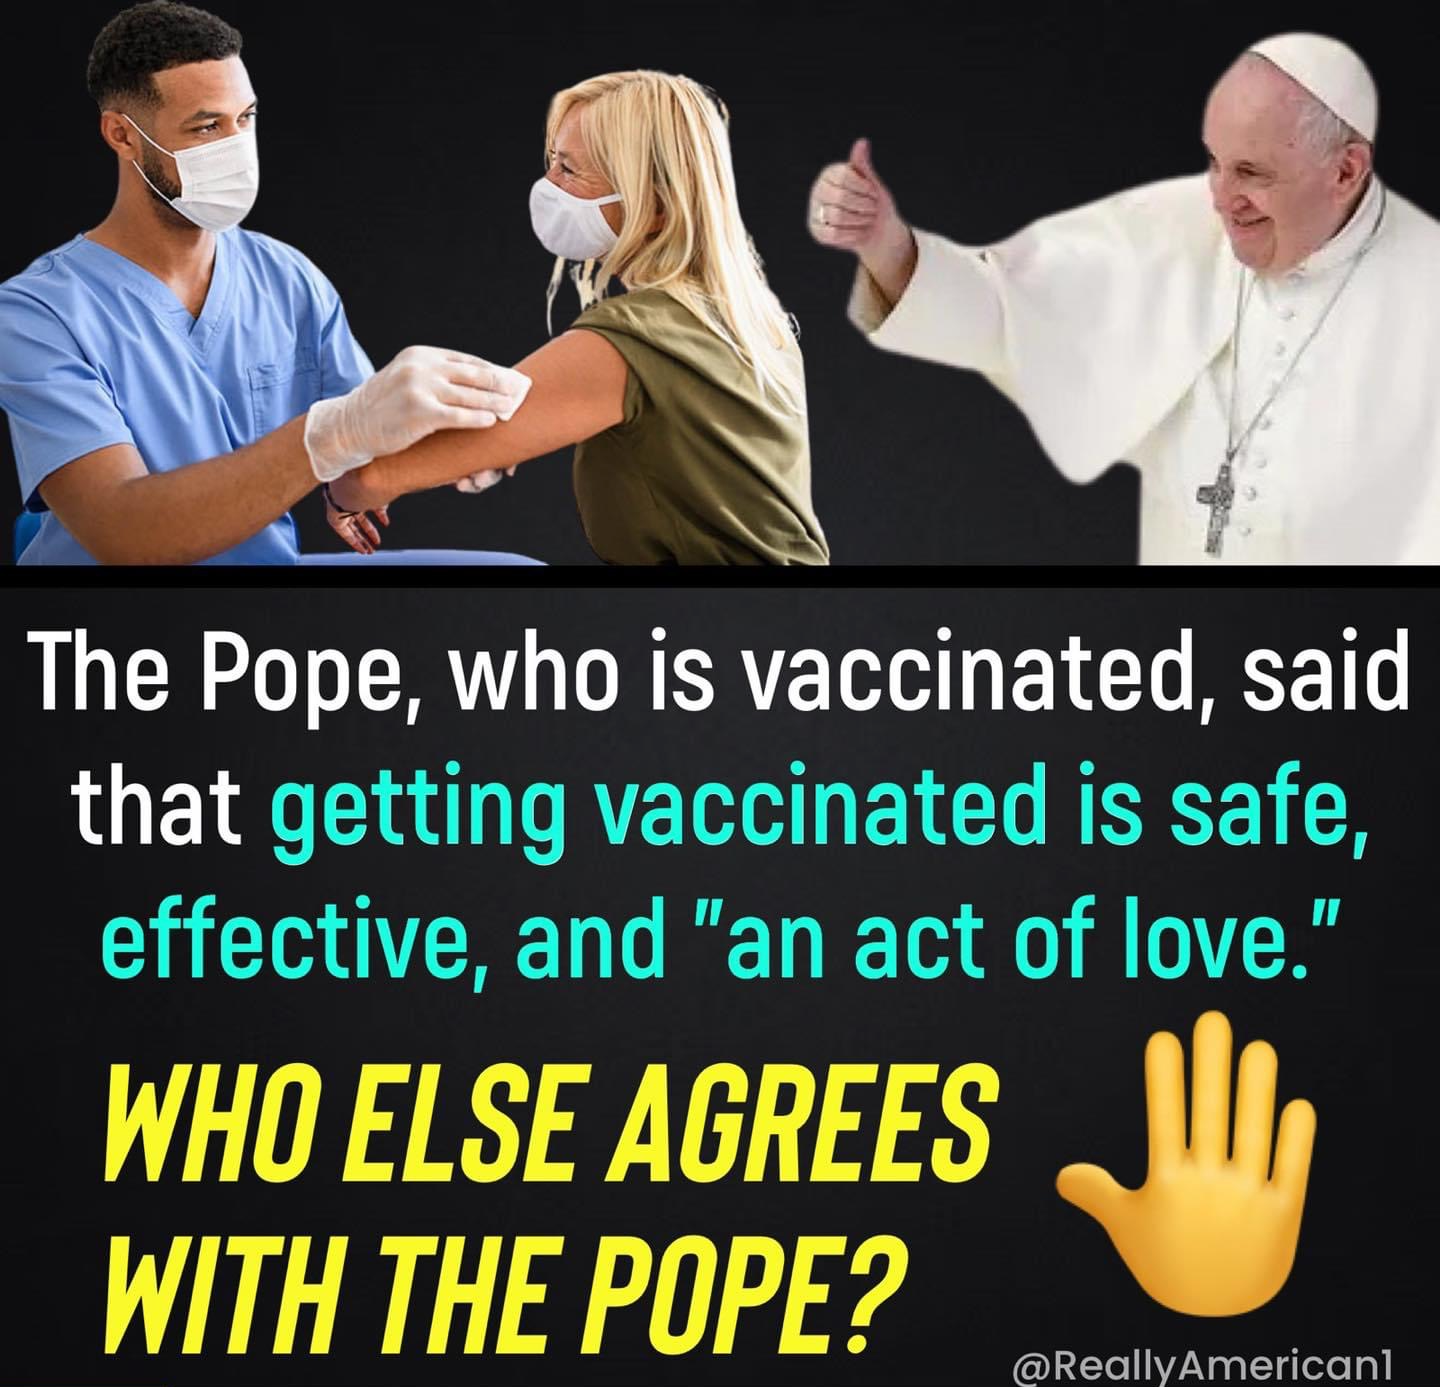 The Pope says getting vaccinated is an act of love Blank Meme Template